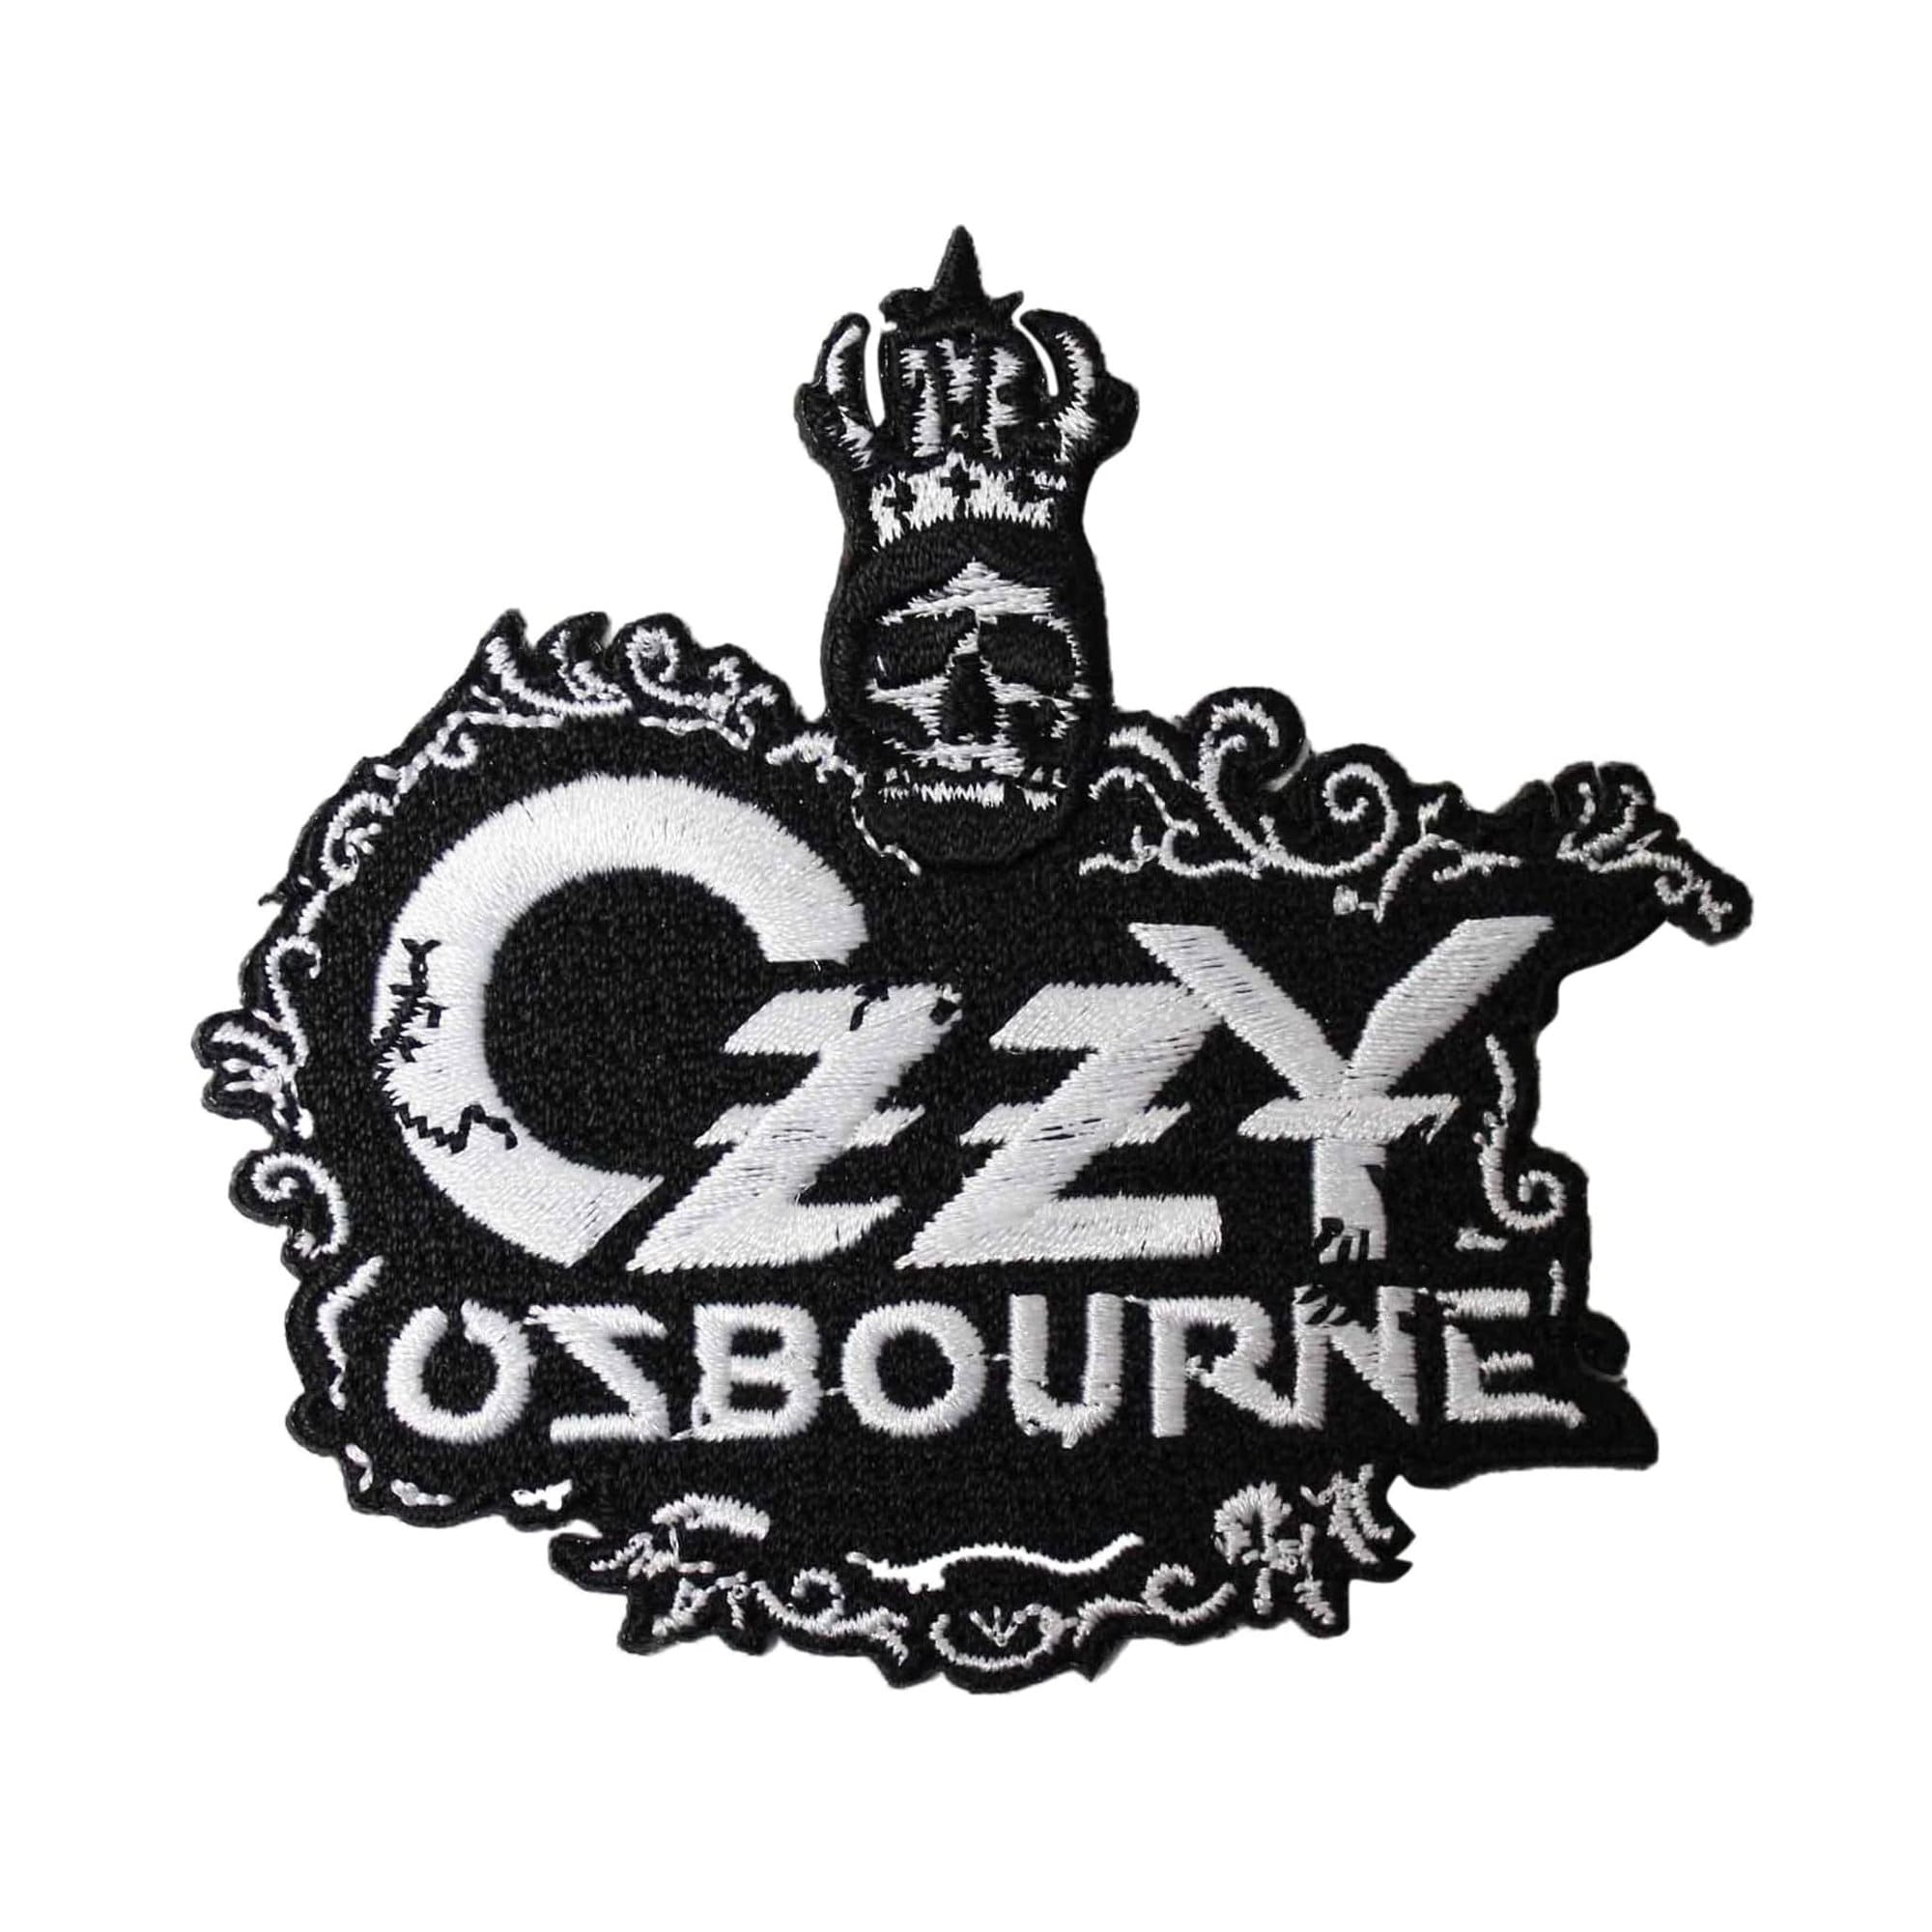 Ozzy Osbourne Patch~Embroidered~Iron or Sew on~4 7/8" x 2"~FREE US Mail 